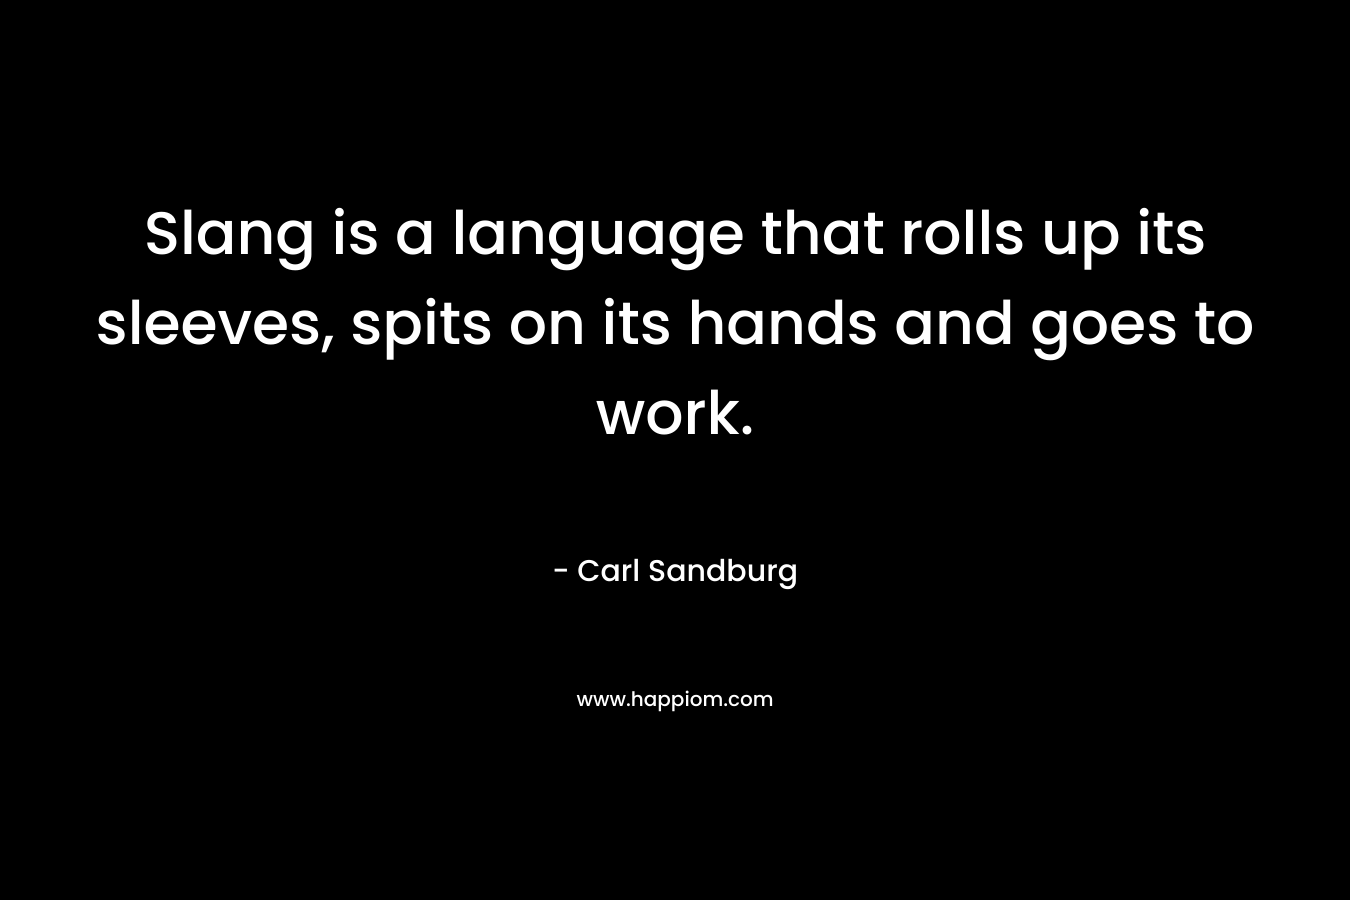 Slang is a language that rolls up its sleeves, spits on its hands and goes to work.